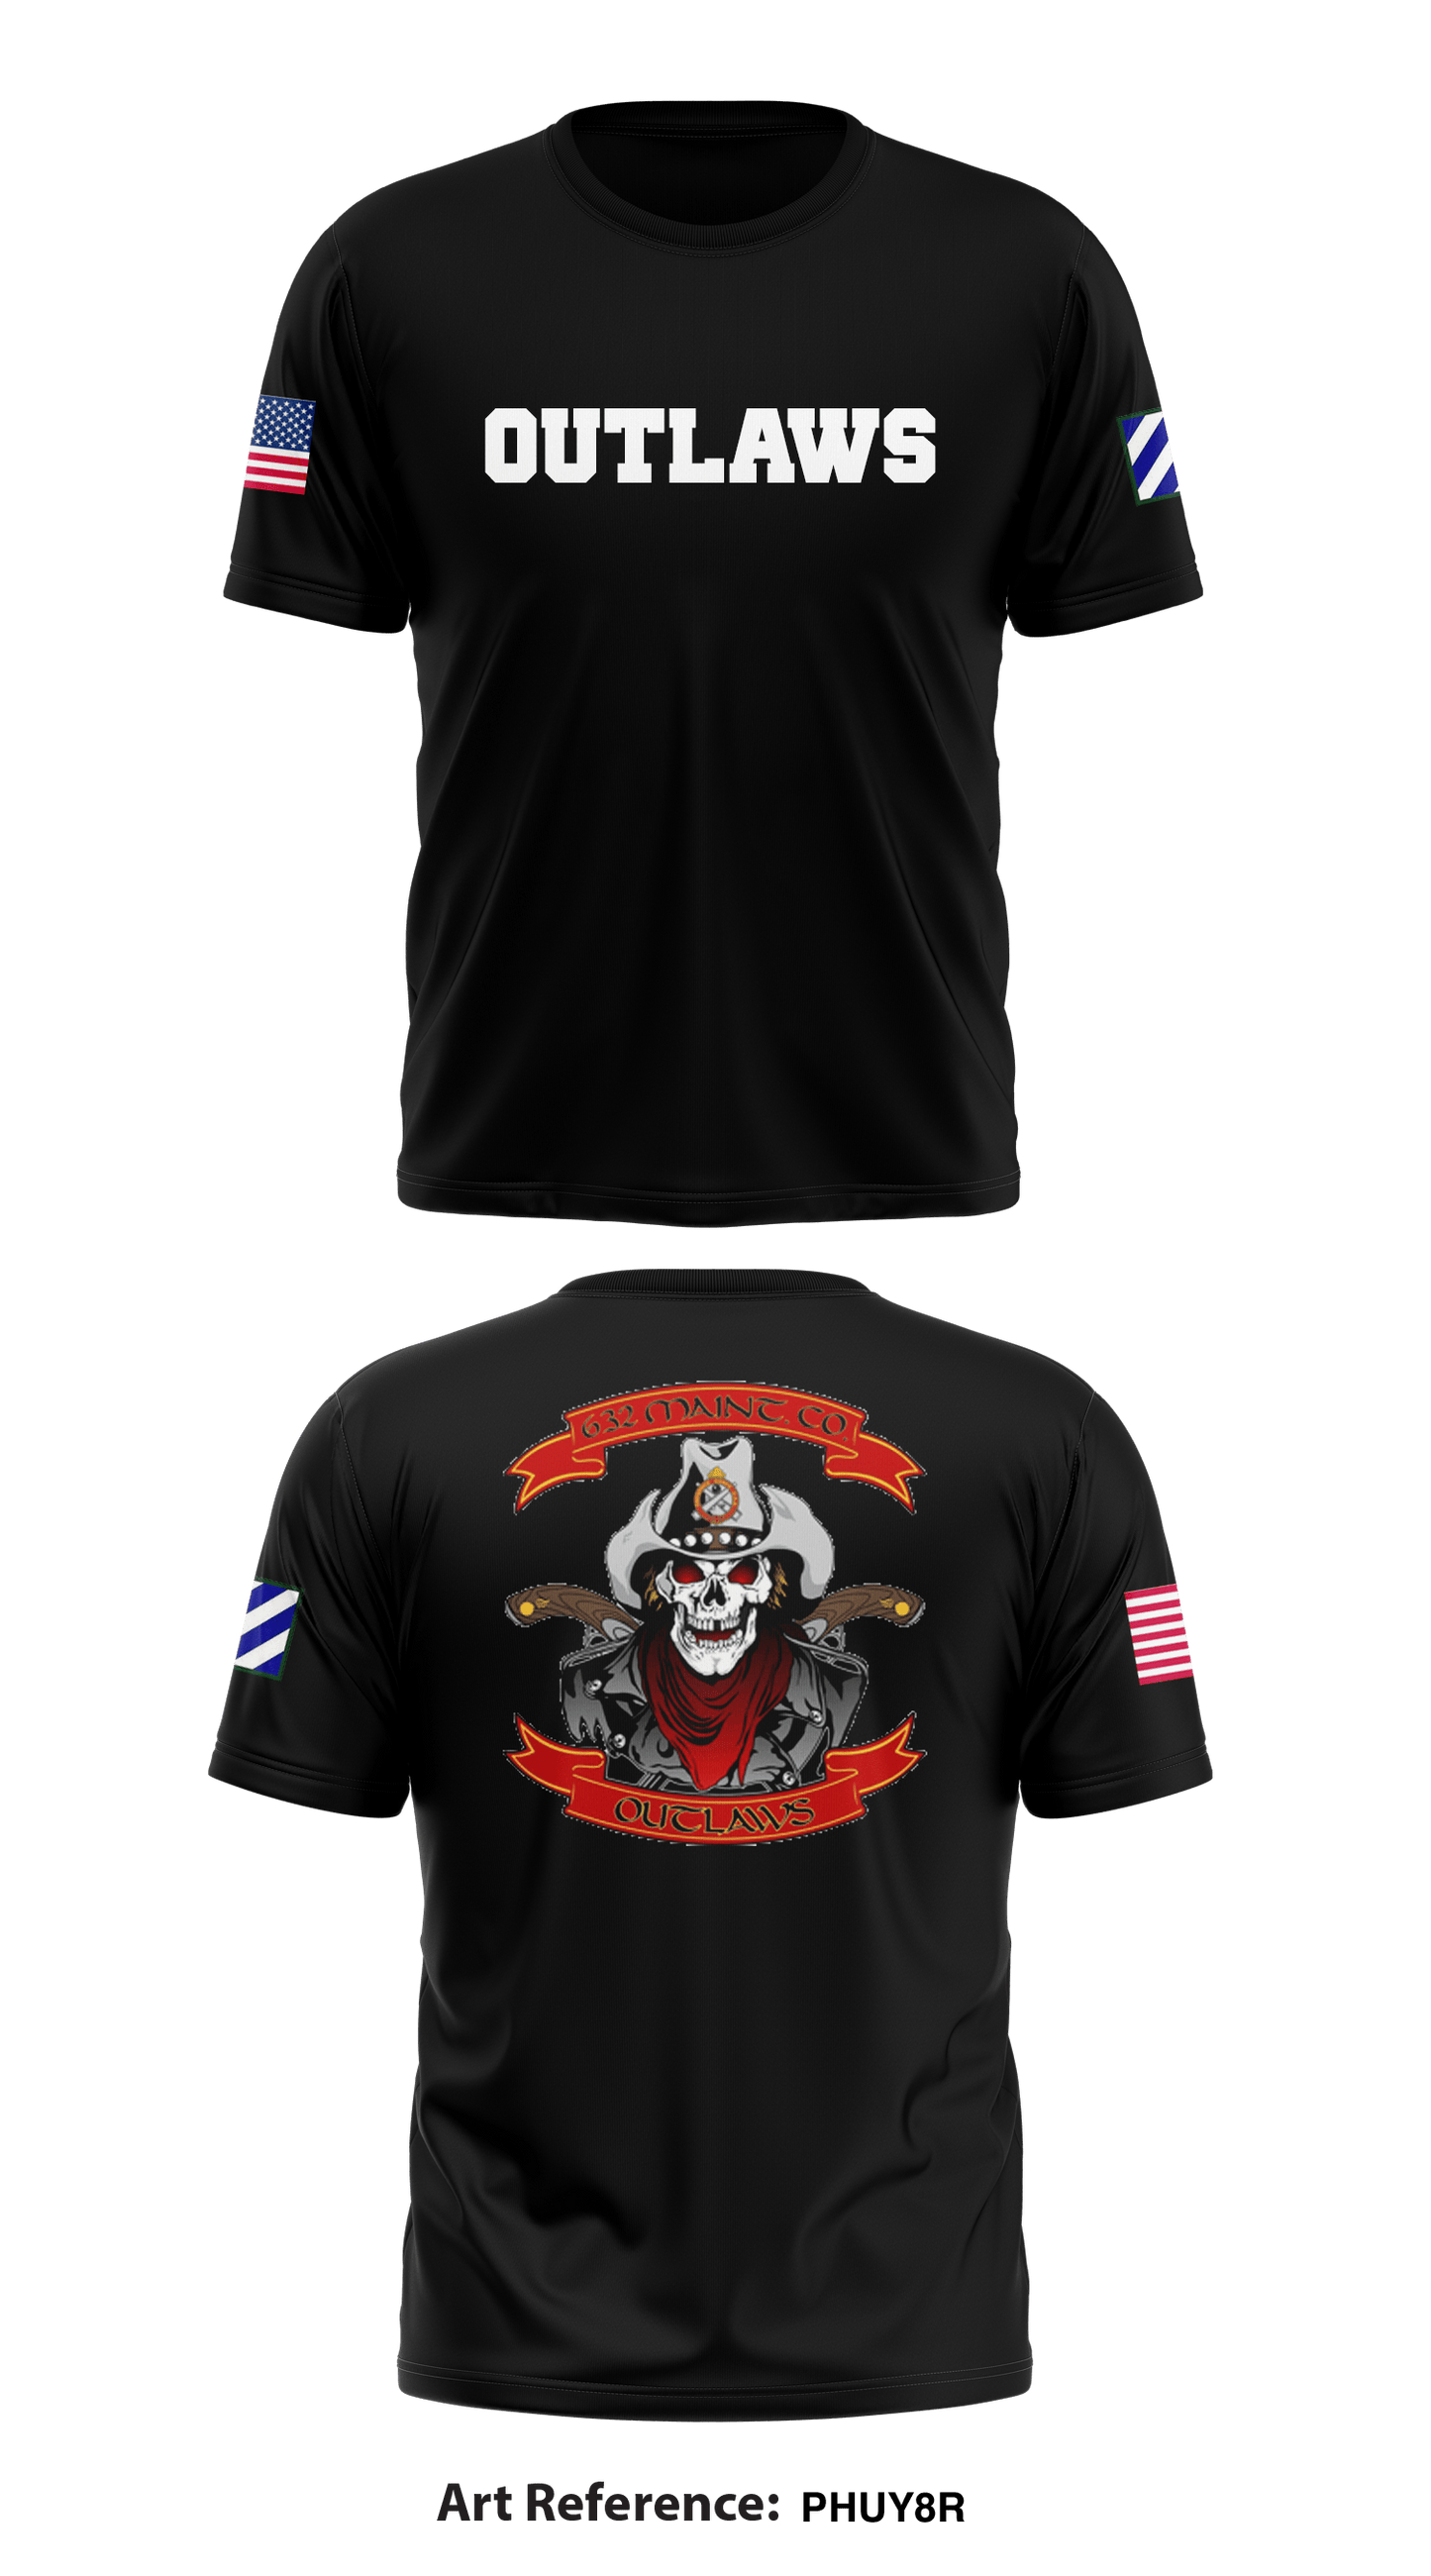 632nd SMC Core Men's SS Performance Tee - PHUY8r